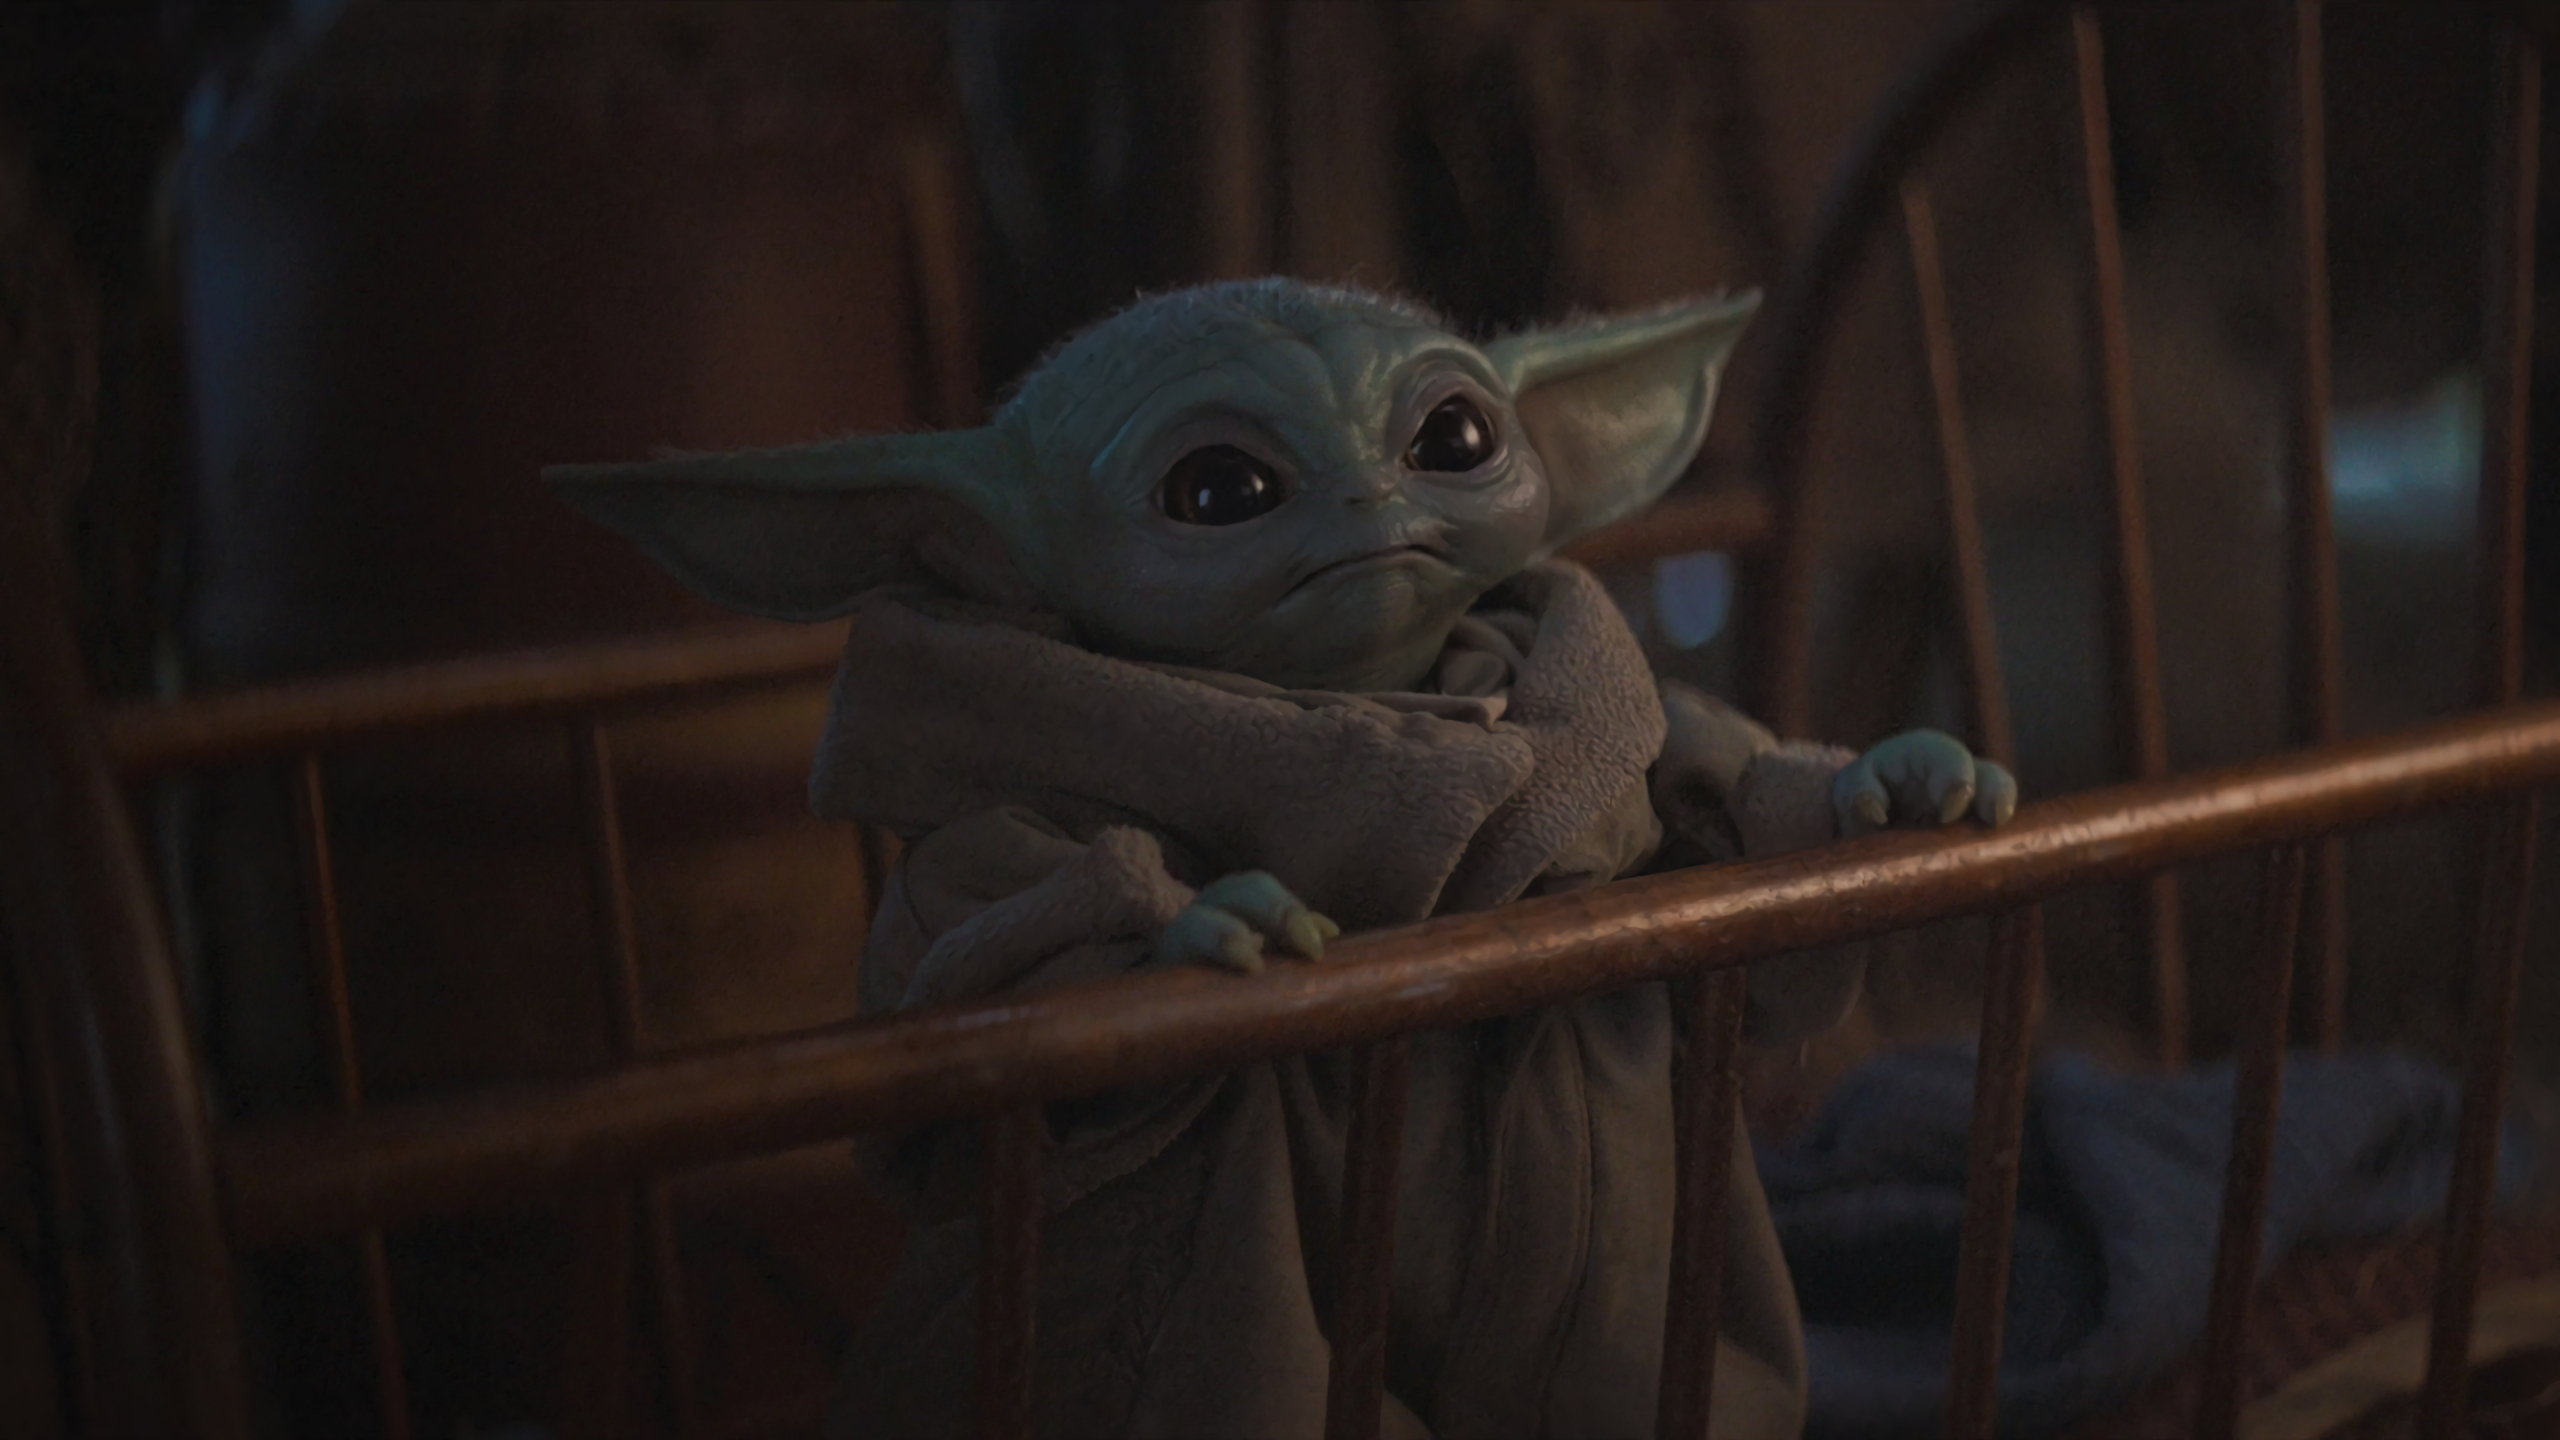 2560x1440 Cute Baby Yoda From Mandalorian 1440p Resolution Wallpaper Hd Tv Series 4k Wallpapers Images Photos And Background Wallpapers Den